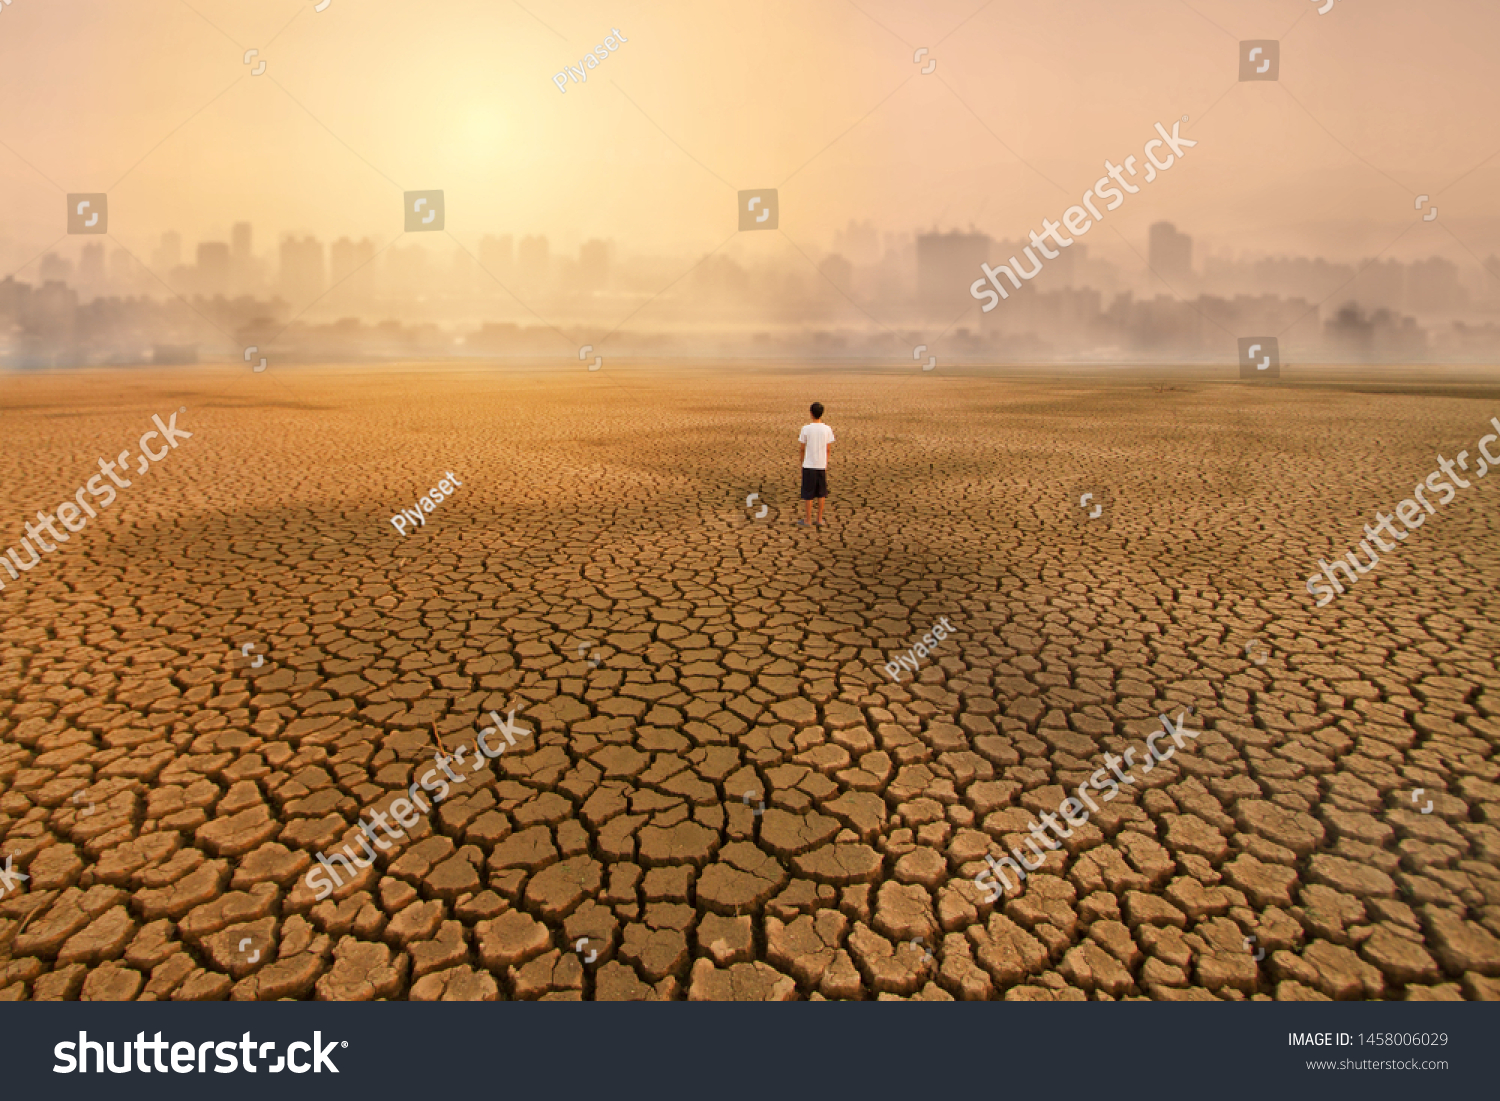 a man standing at empty land of dry cracked earth and looking to the big city with air polluted environment metaphor Climate change, Water crisis, Environment pollution of activity from urban concept. #1458006029